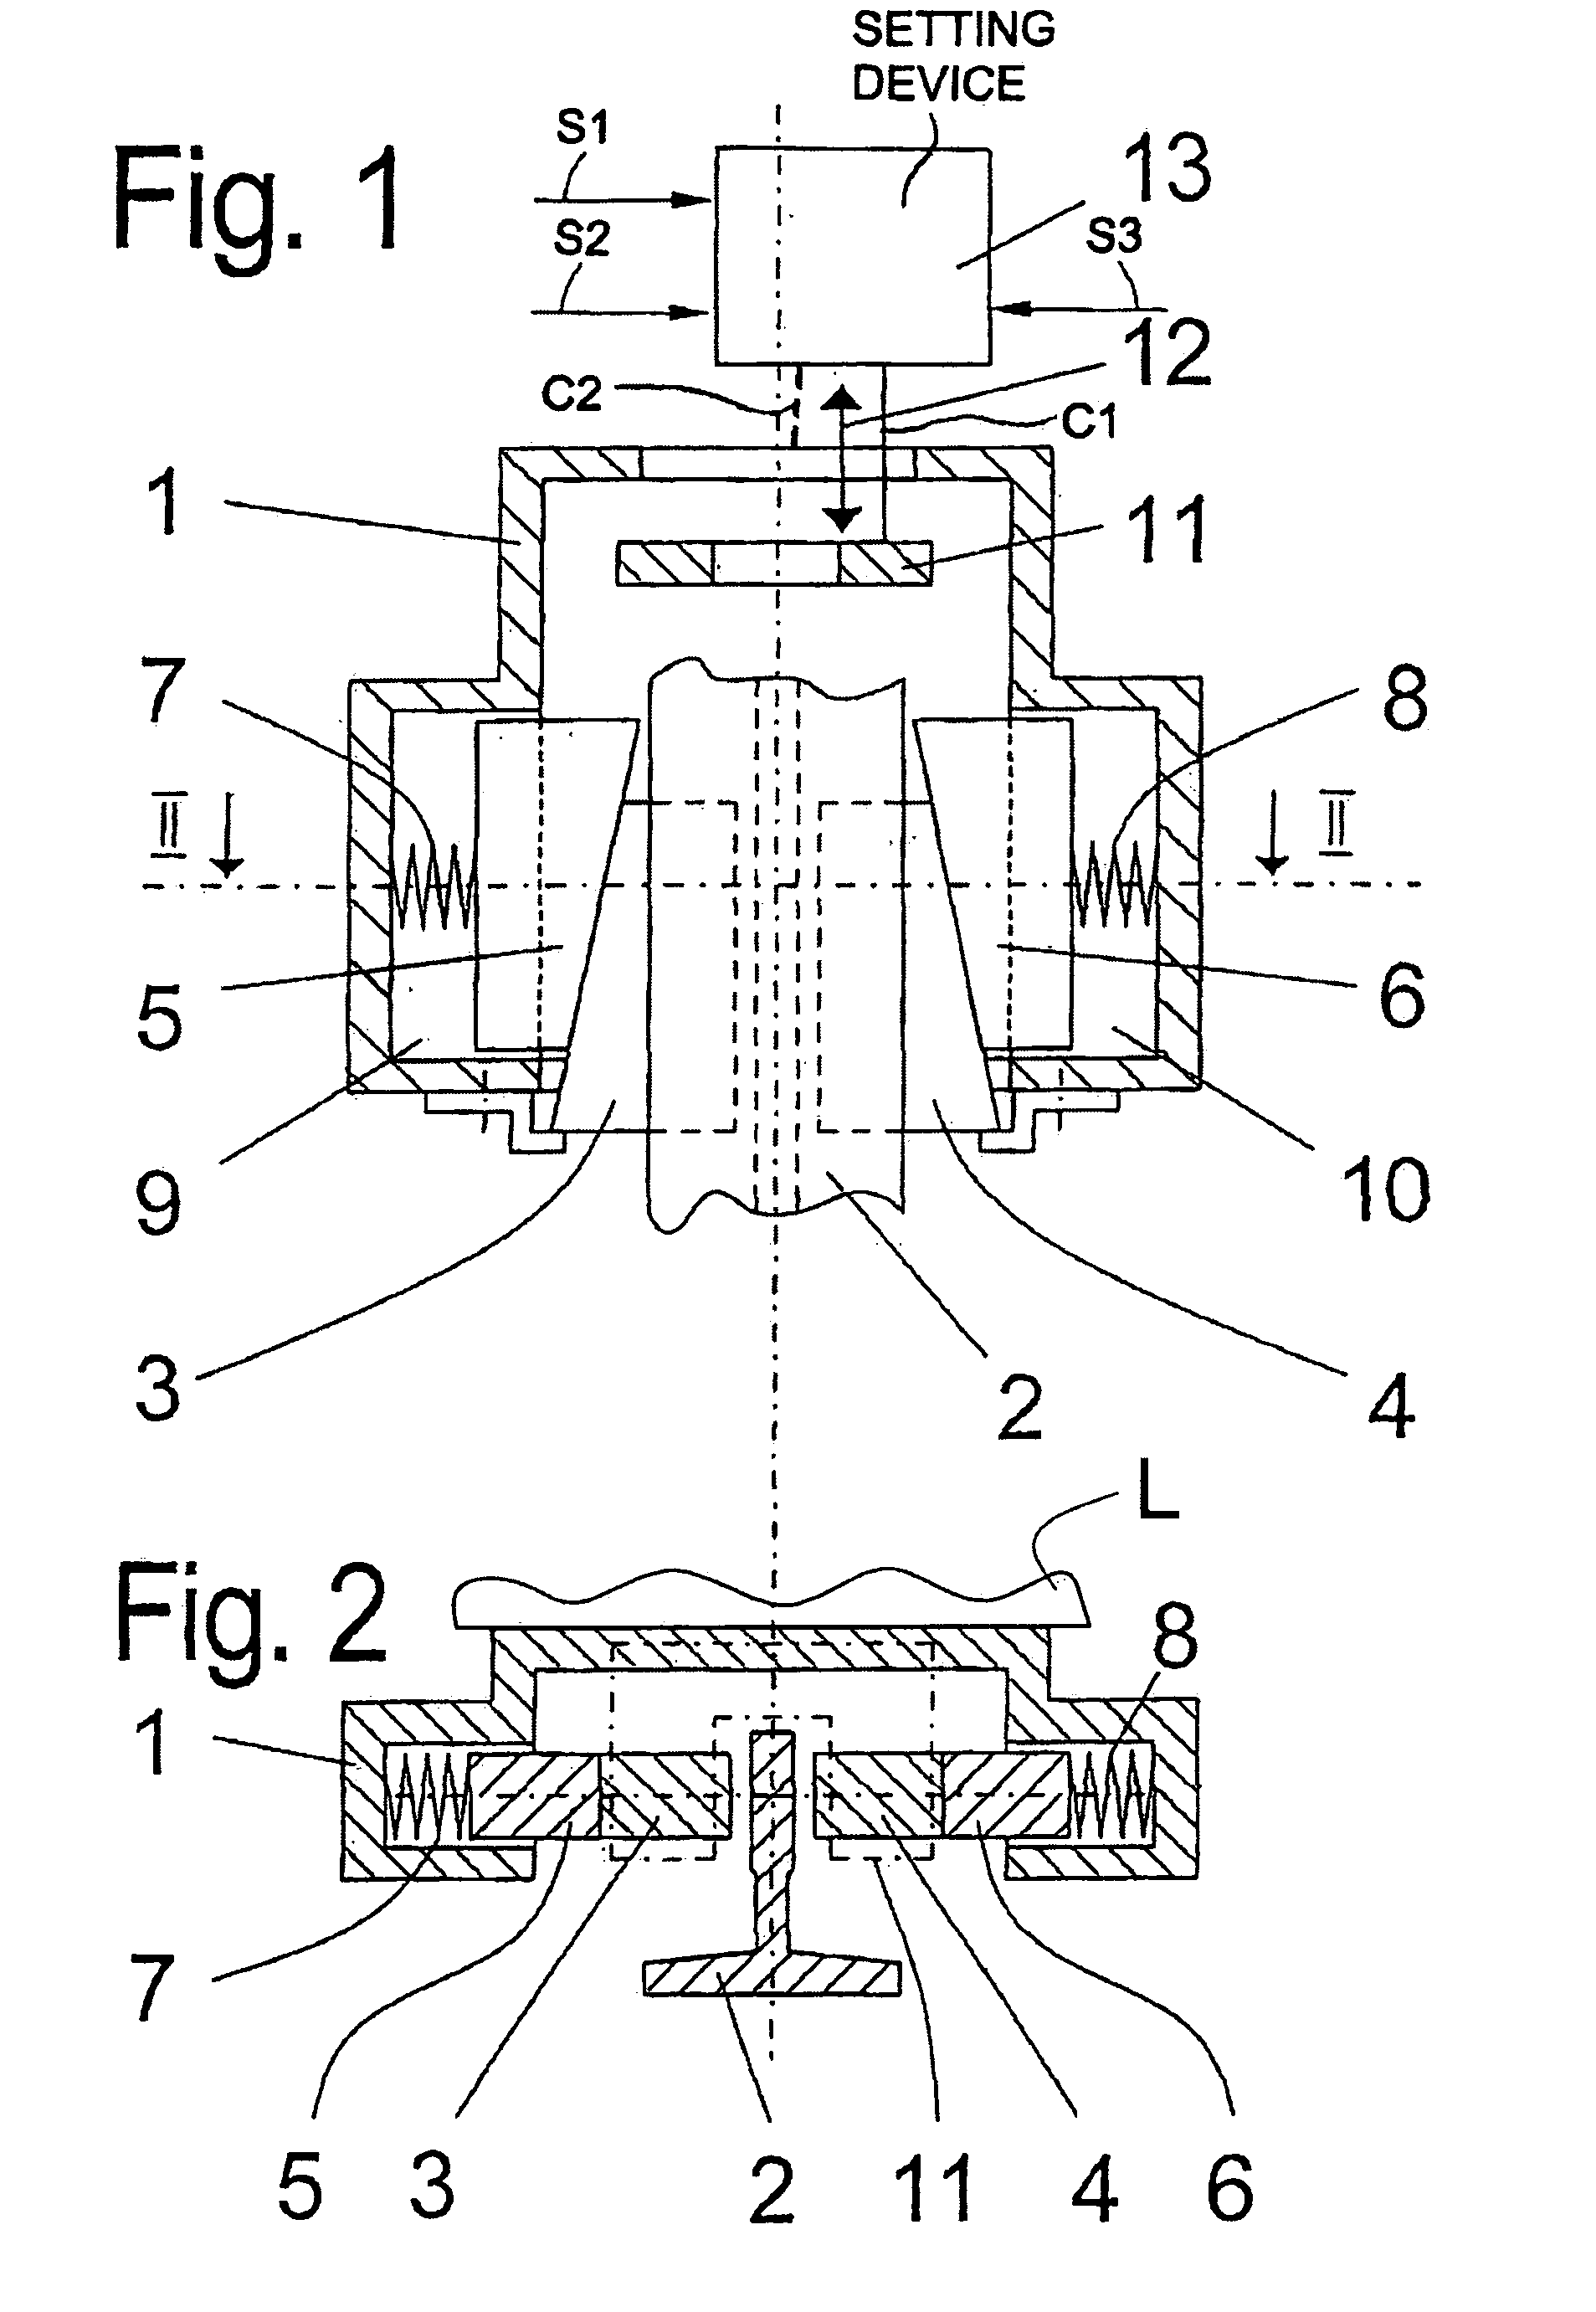 Brake arresting device with adaptable brake force for an elevator